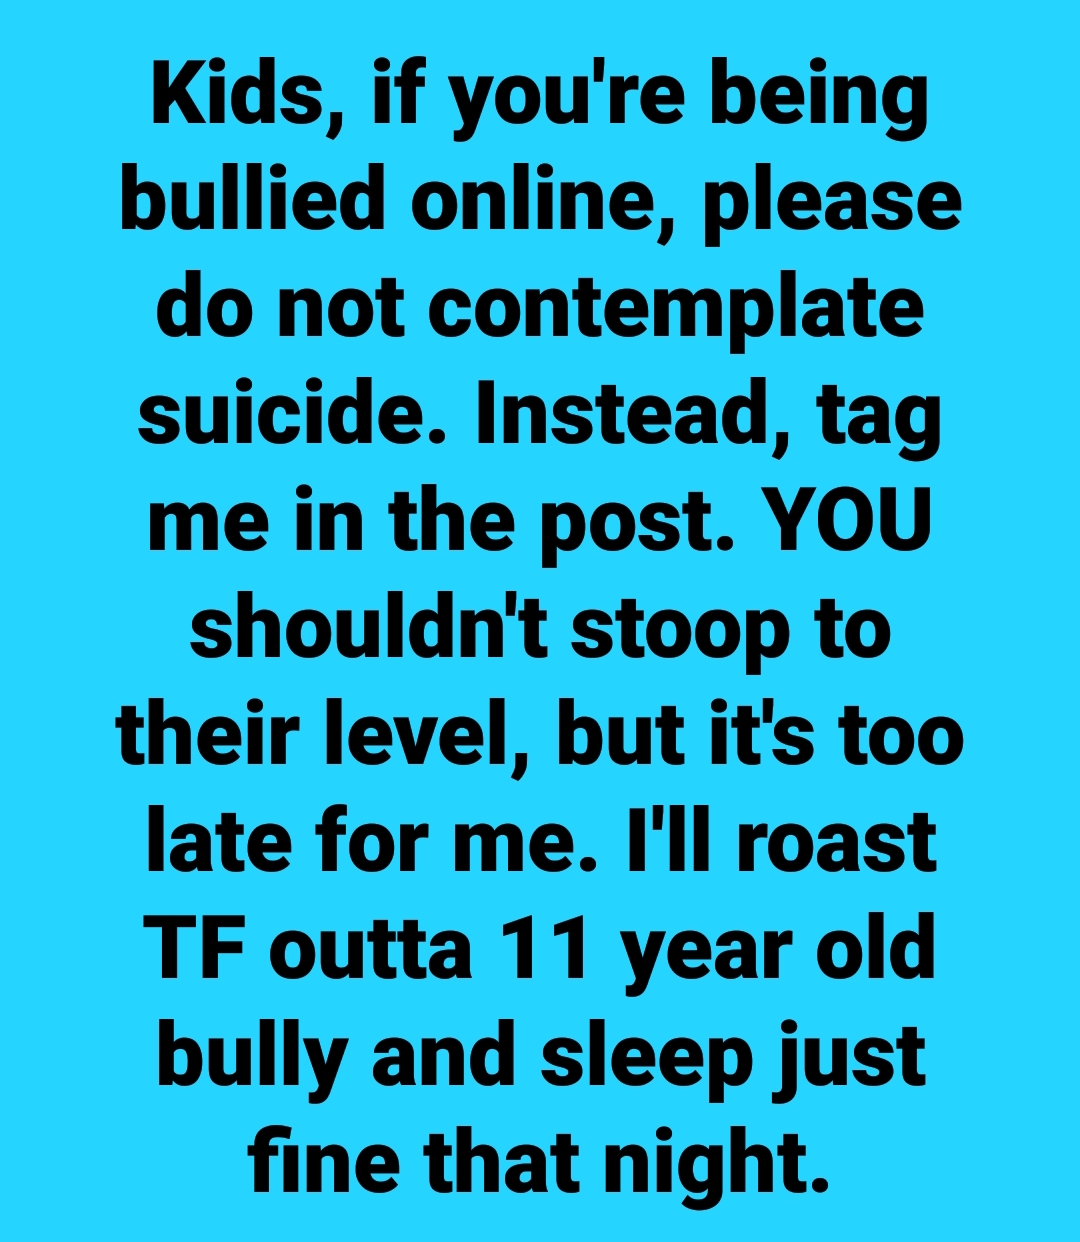 drugs - Kids, if you're being bullied online, please do not contemplate suicide. Instead, tag me in the post. You shouldn't stoop to their level, but it's too late for me. I'll roast Tf outta 11 year old bully and sleep just fine that night.